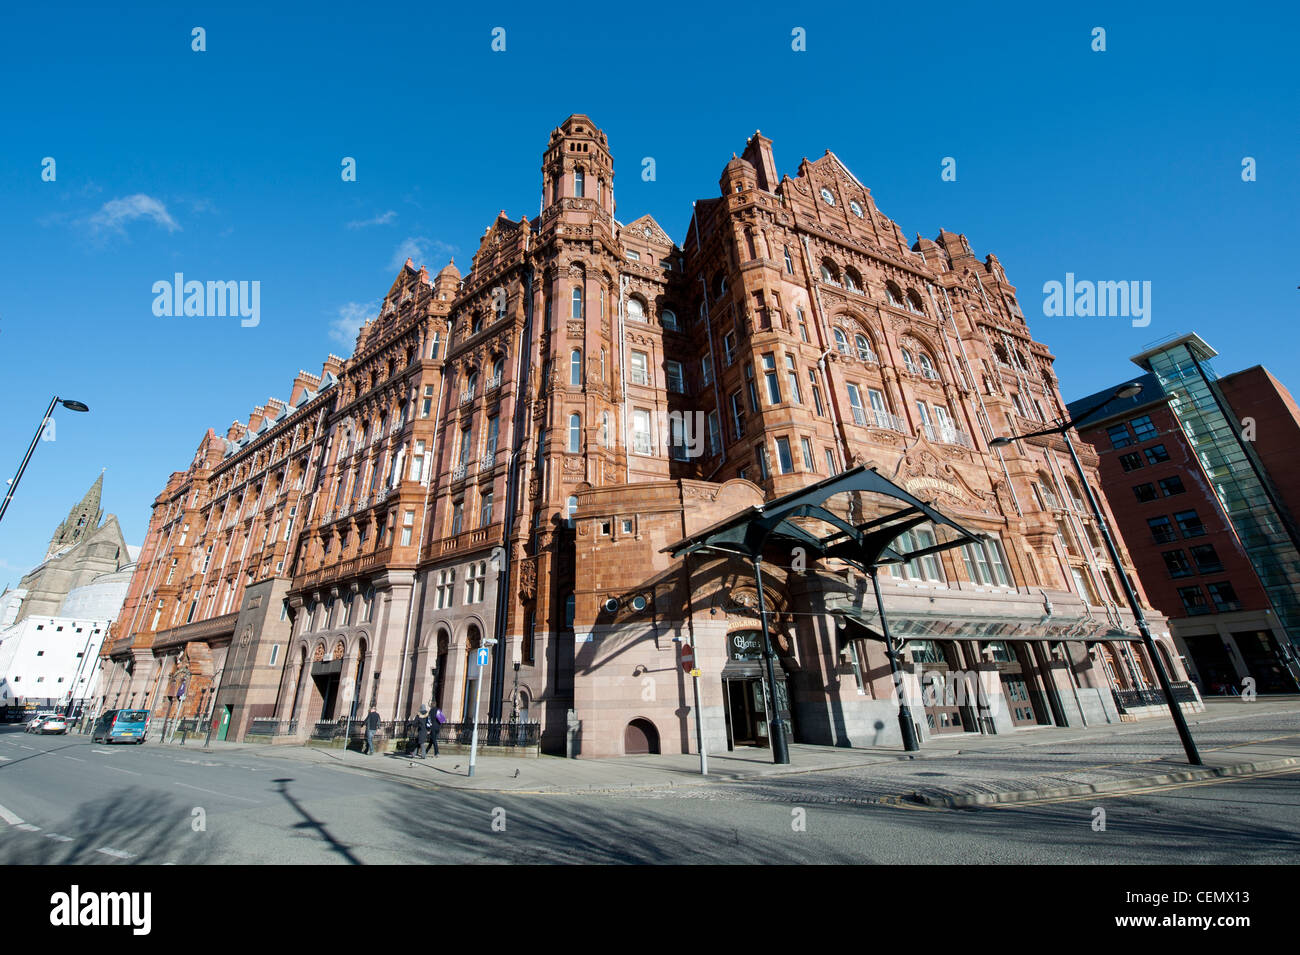 The Midland Hotel in Manchester City Centre on a clear blue sky day. Stock Photo